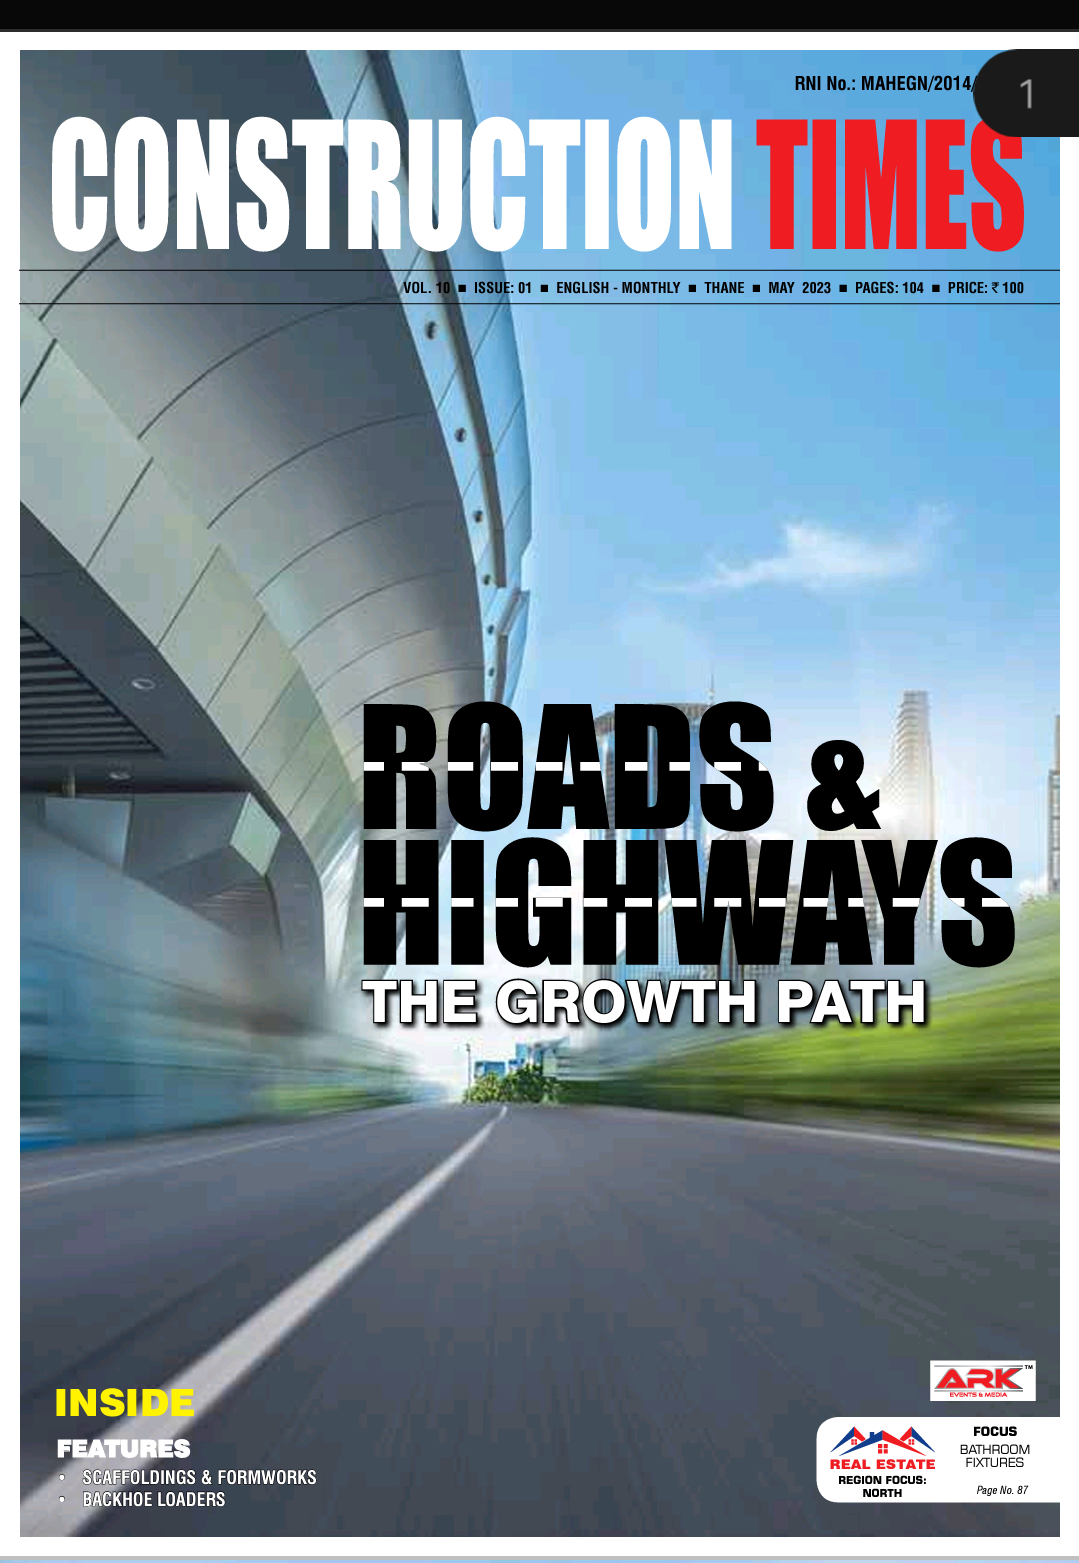 ROADS &  HIGHWAYS: THE GROWTH PATH